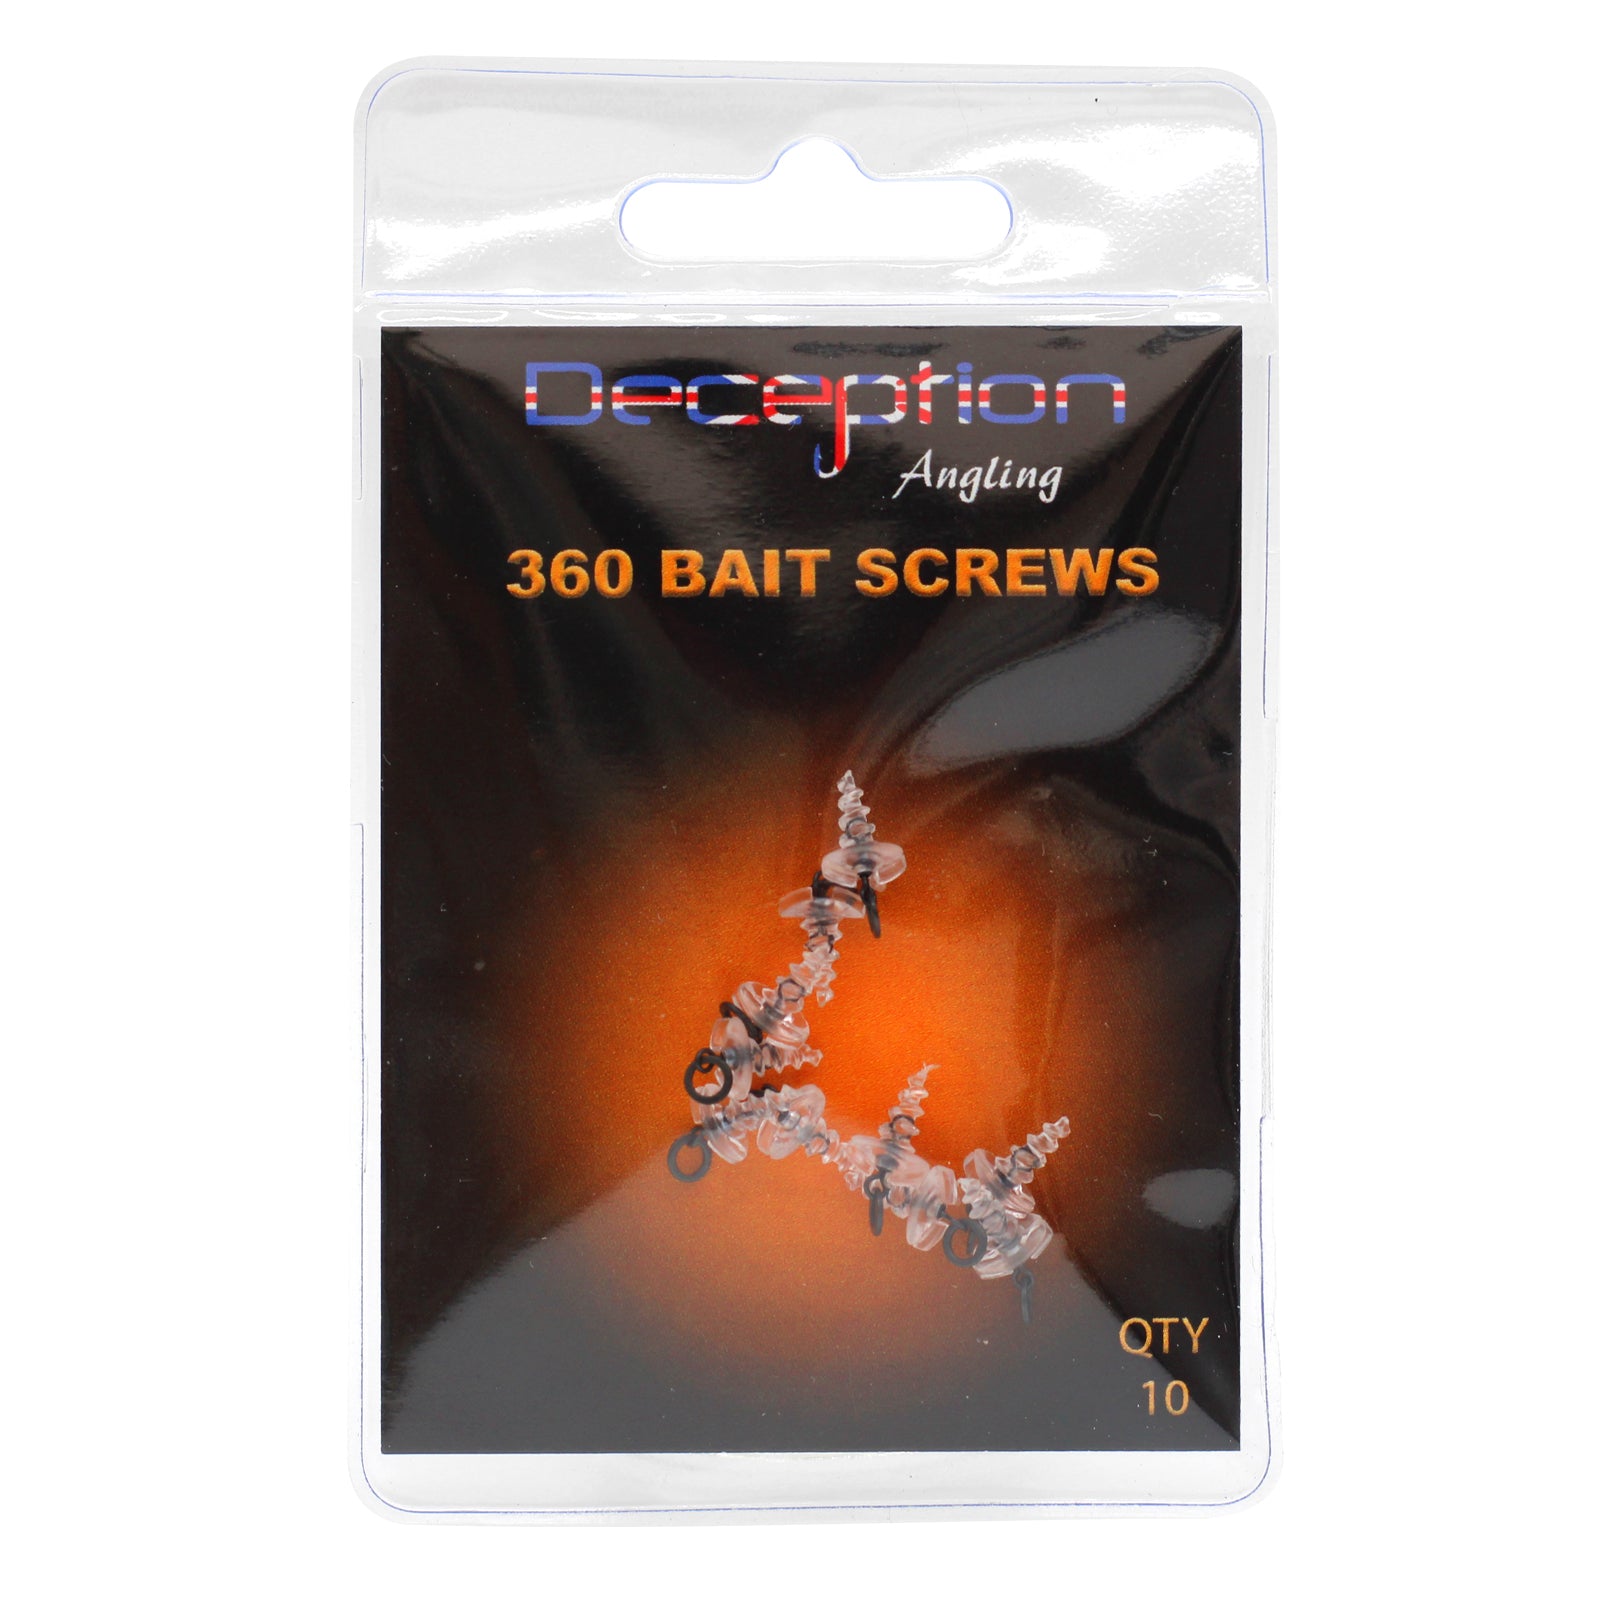 Deception Angling 360 Bait Screws for Fishing Pack of 10